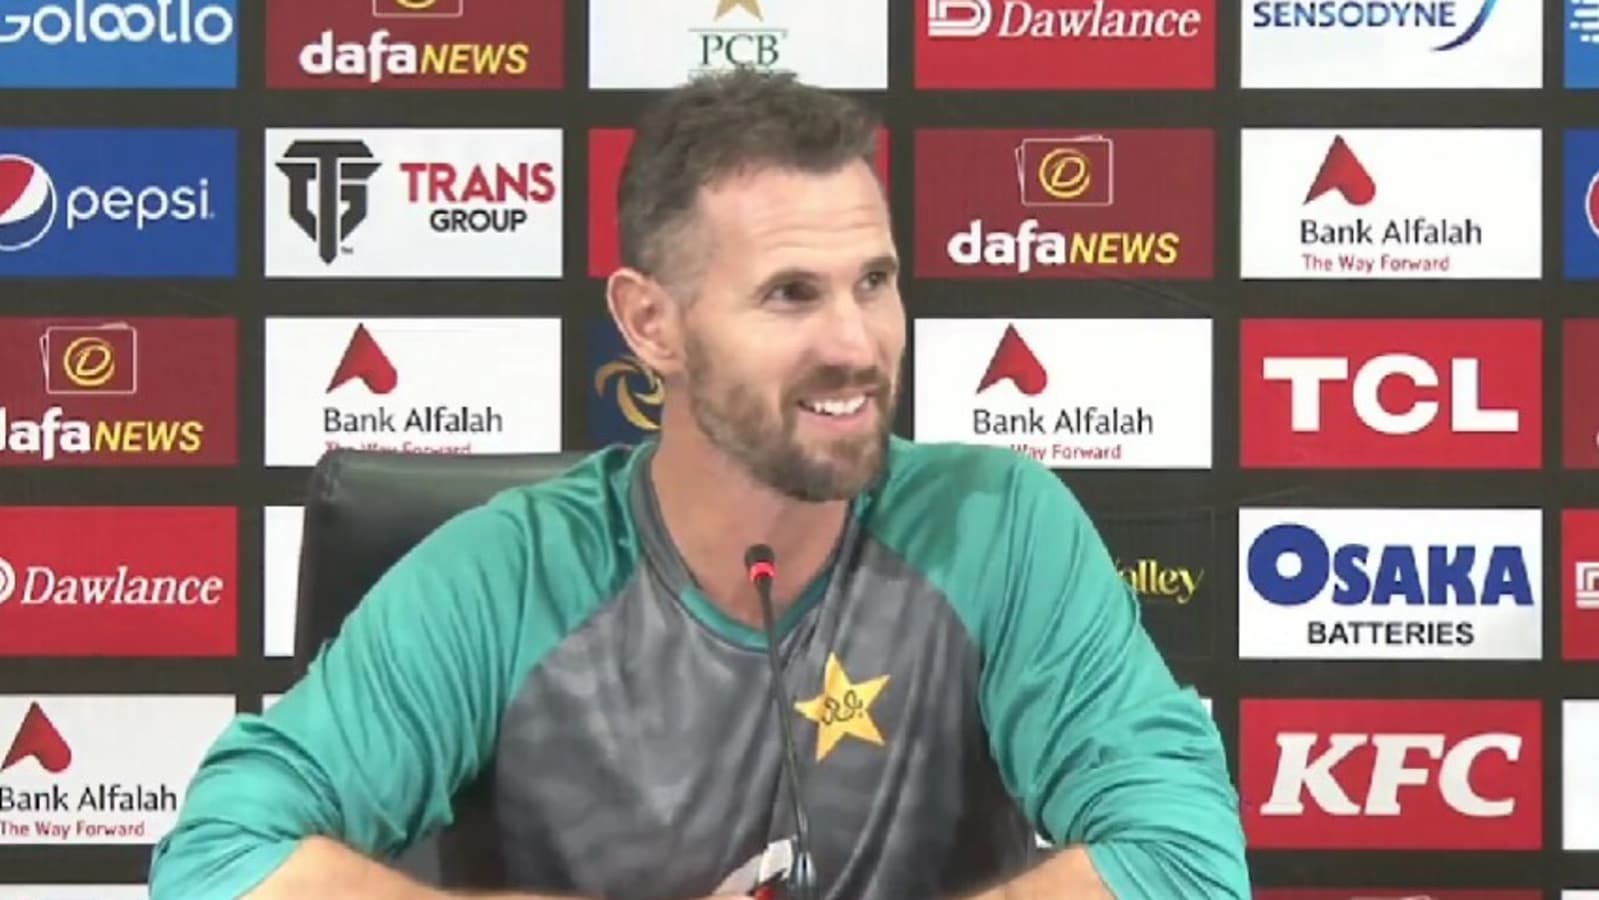 they-send-me-when-shaun-tait-s-epic-reaction-to-pakistan-s-embarrassing-loss-floors-reporters-in-press-conference